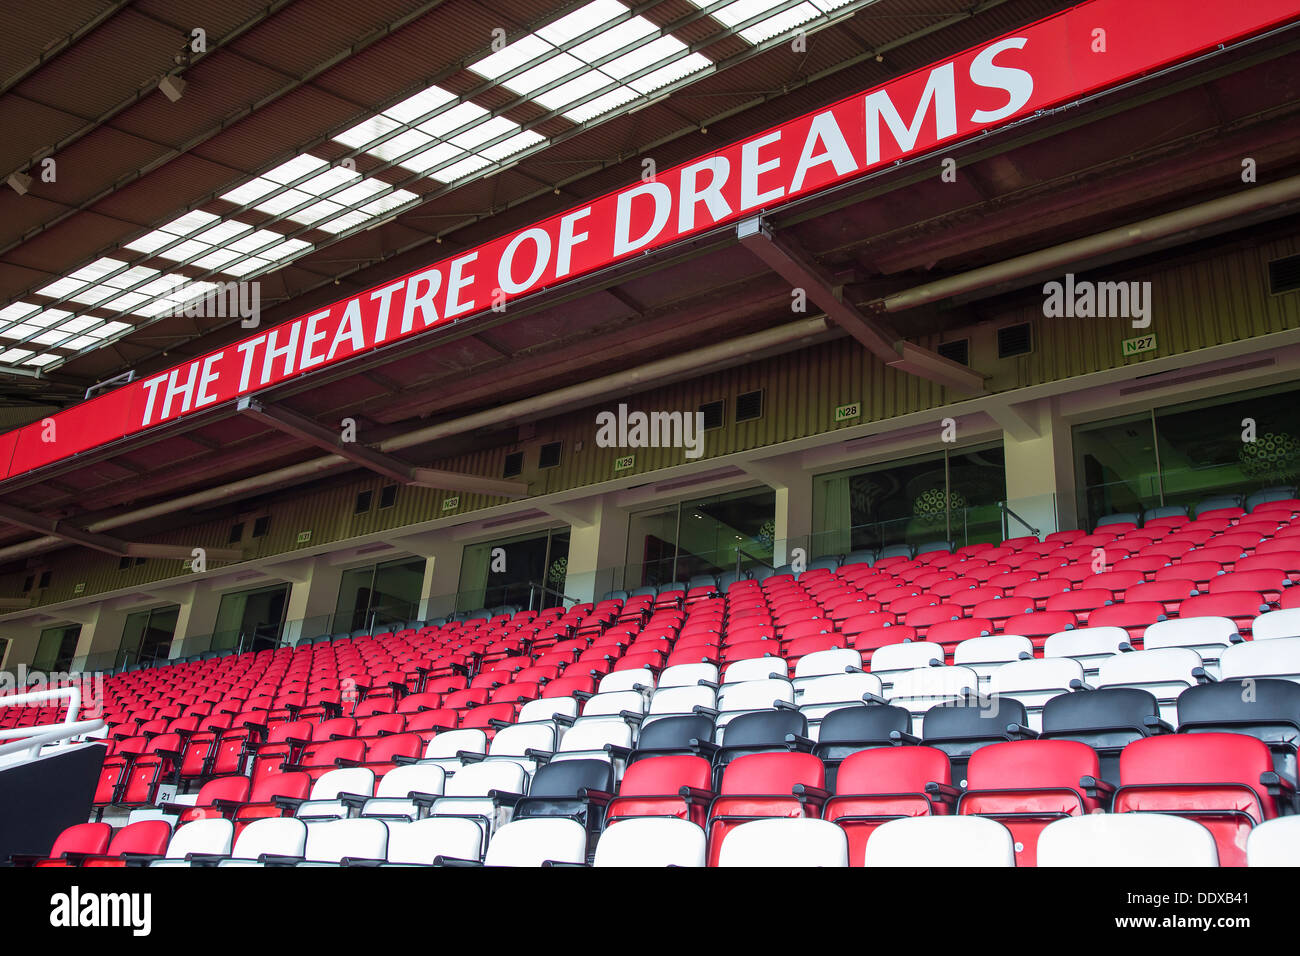 Seats and The Theatre Of Dreams sign at Old Trafford, Manchester United's football stadium. Stock Photo